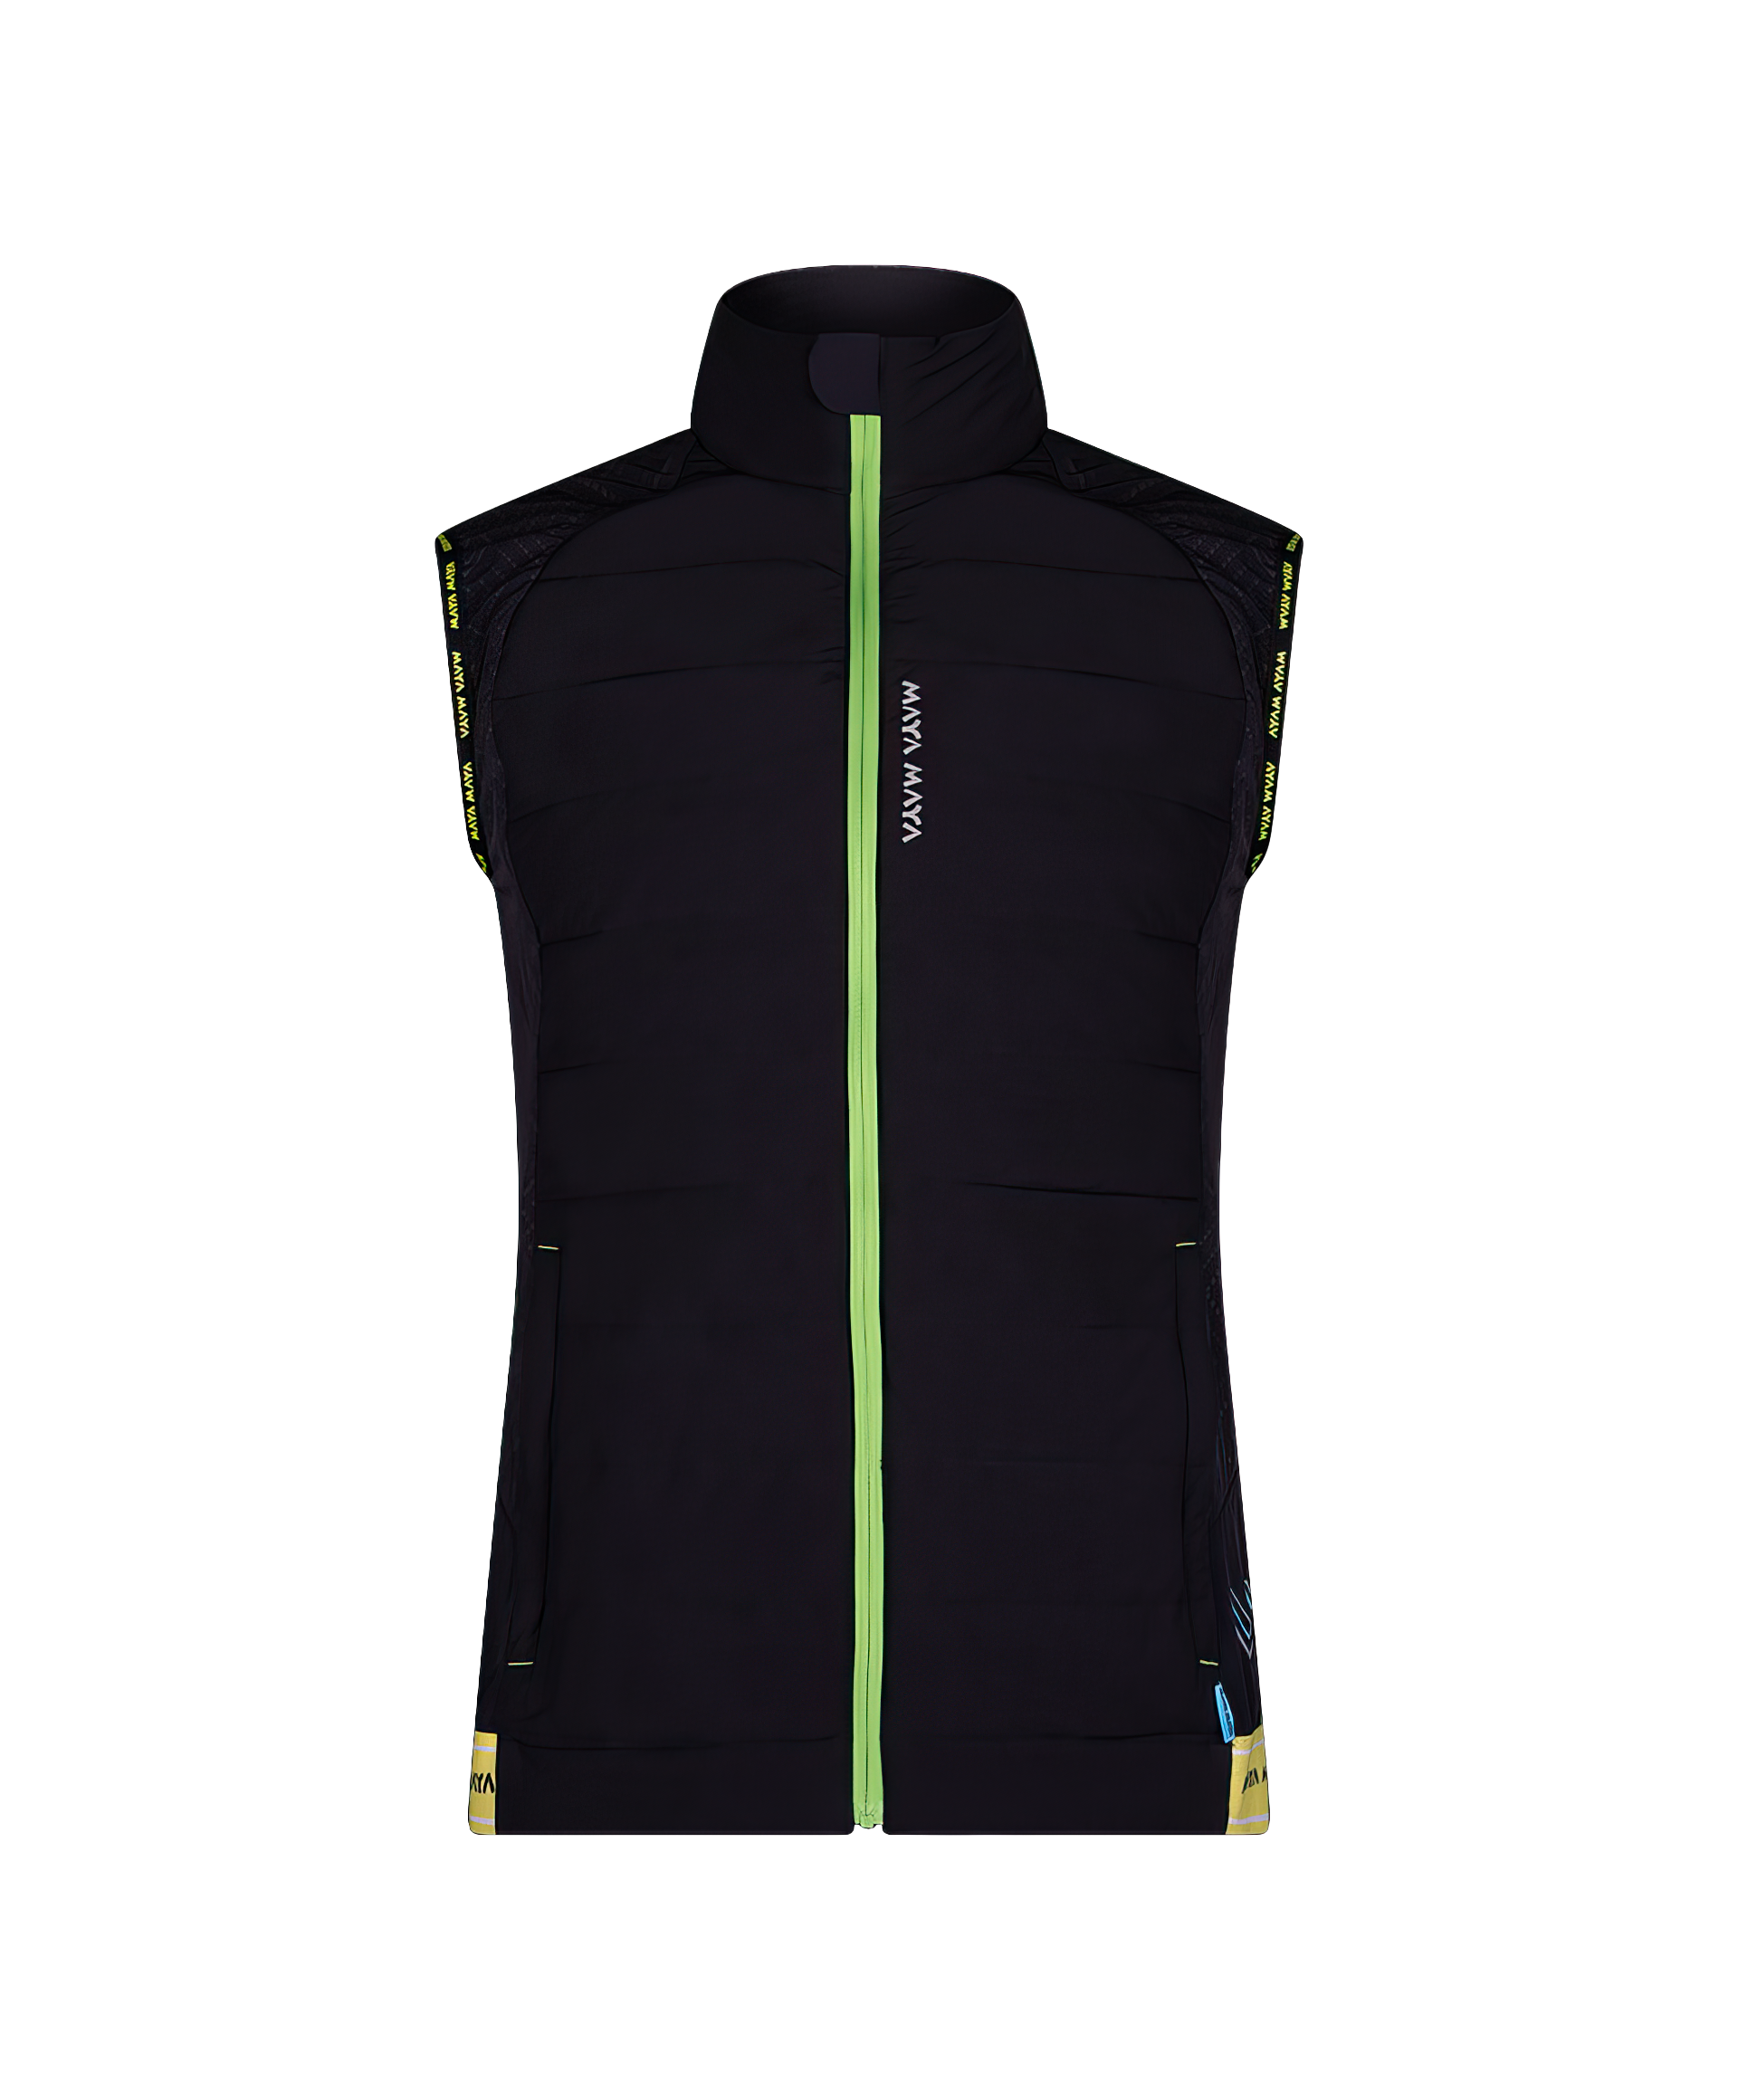 Kabil vest for men from MAYA MAYA for running and hiking with reflective prints